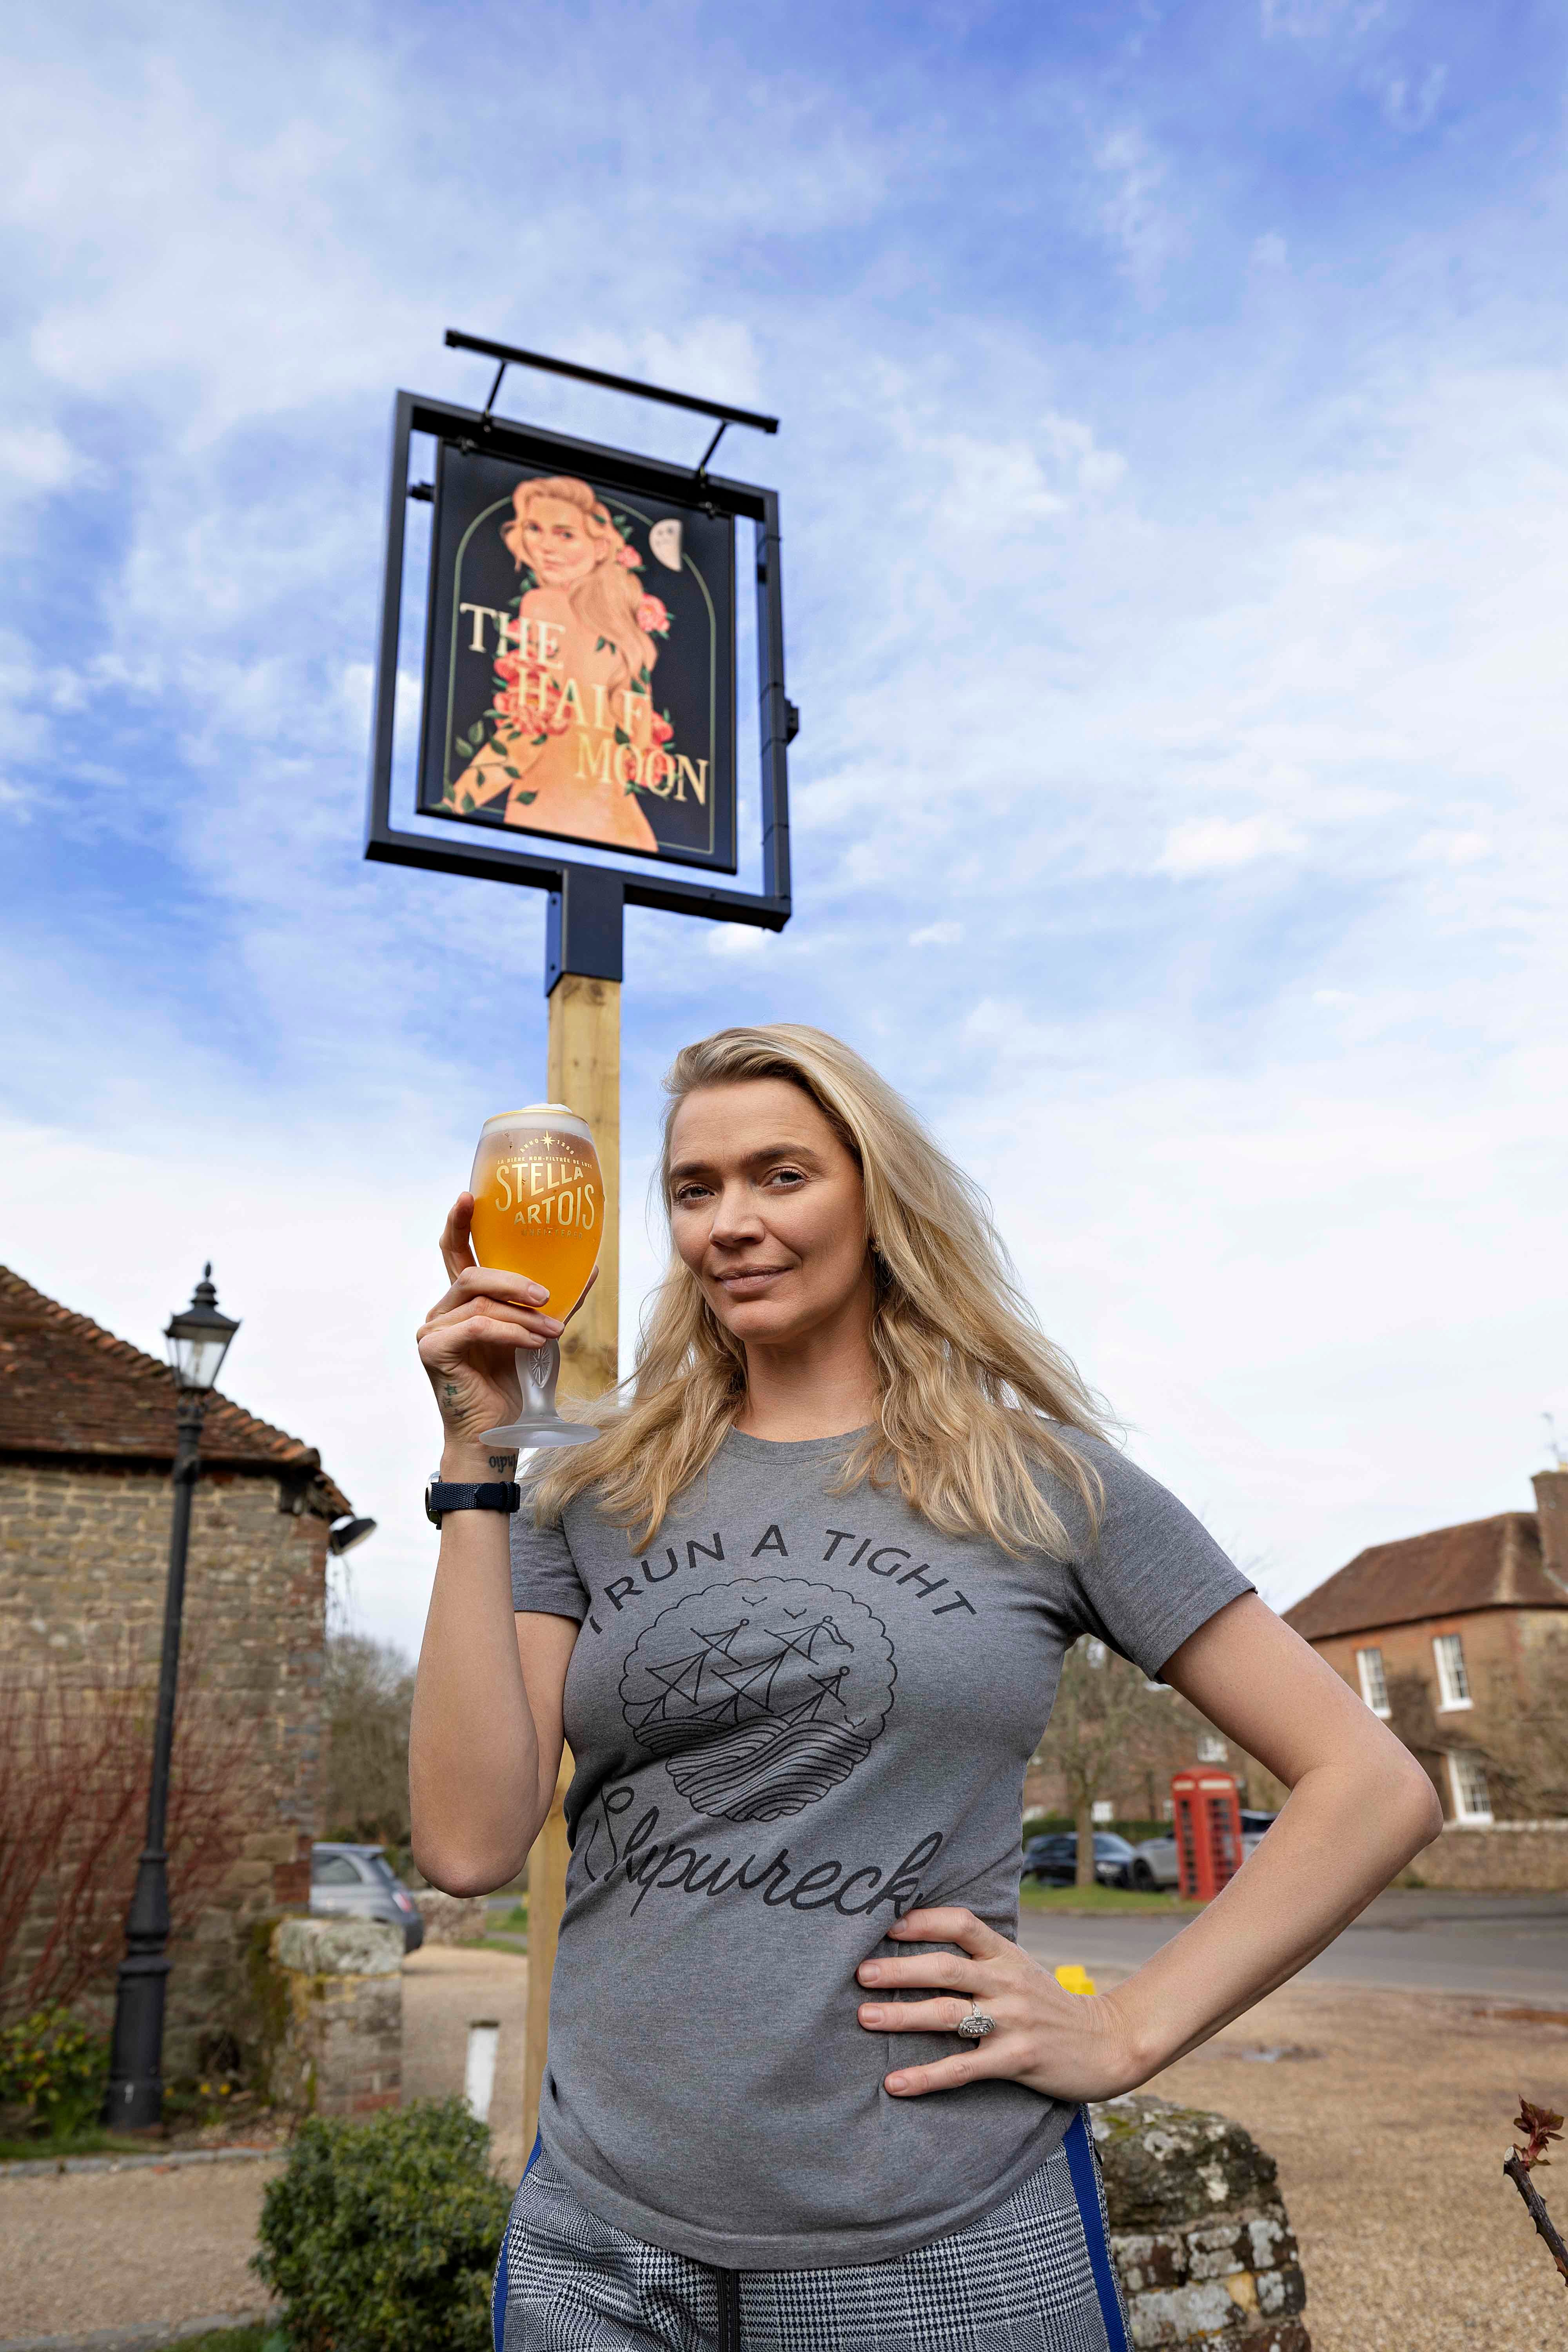 “My pub is fittingly called The Half Moon, and I can’t wait to see the new sign in all its glory - all for a good cause.”